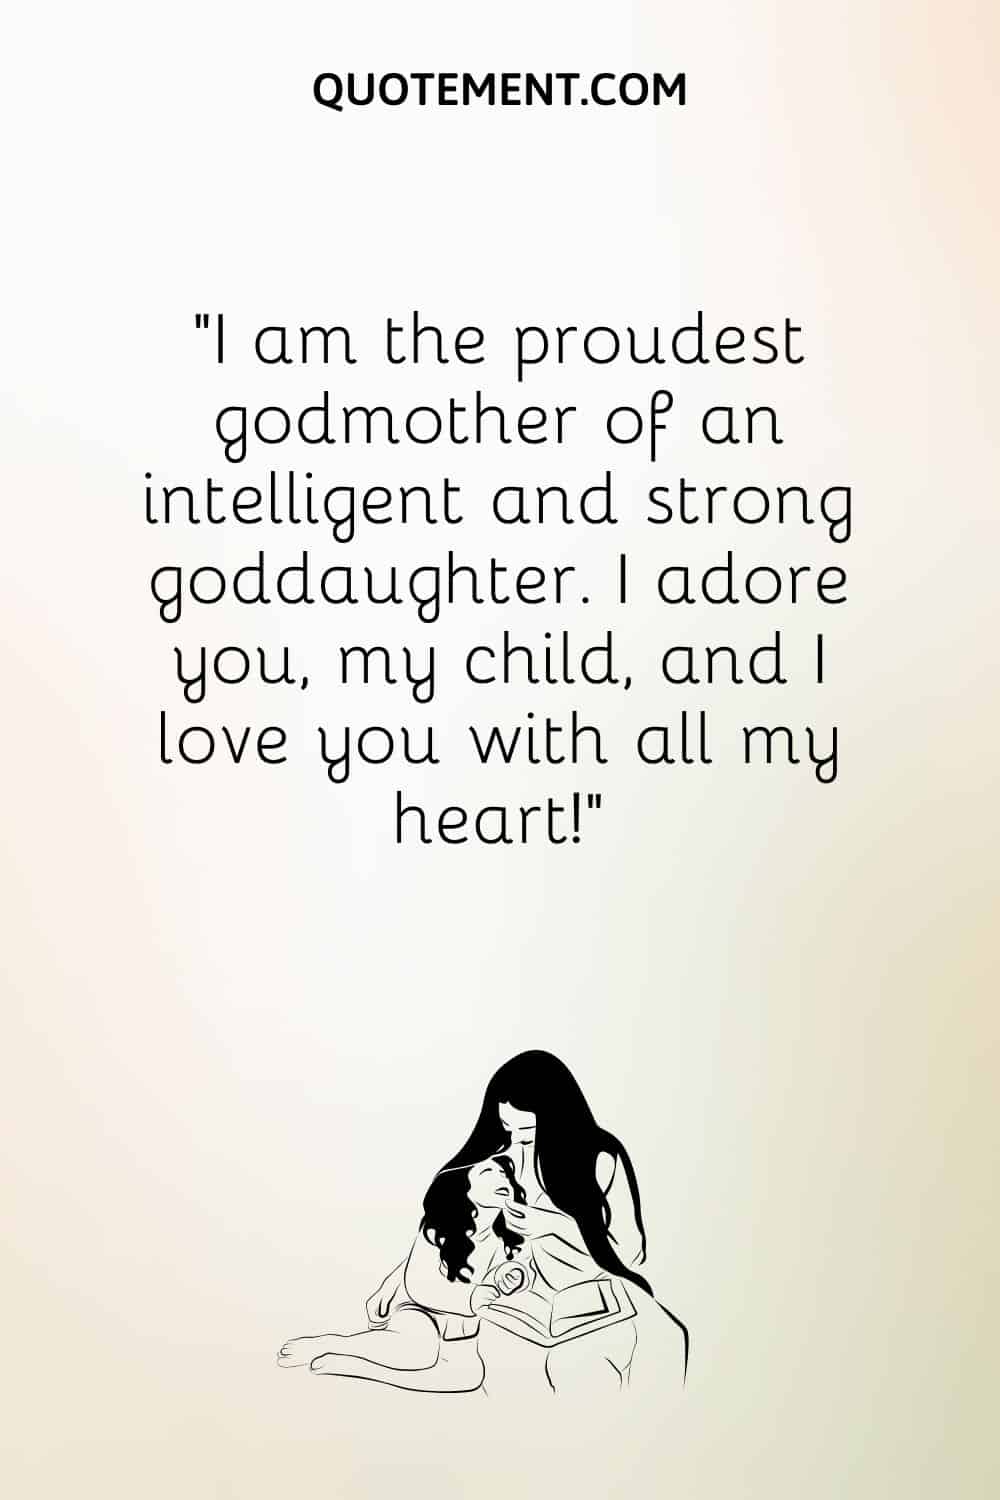 “I am the proudest godmother of an intelligent and strong goddaughter. I adore you, my child, and I love you with all my heart!”